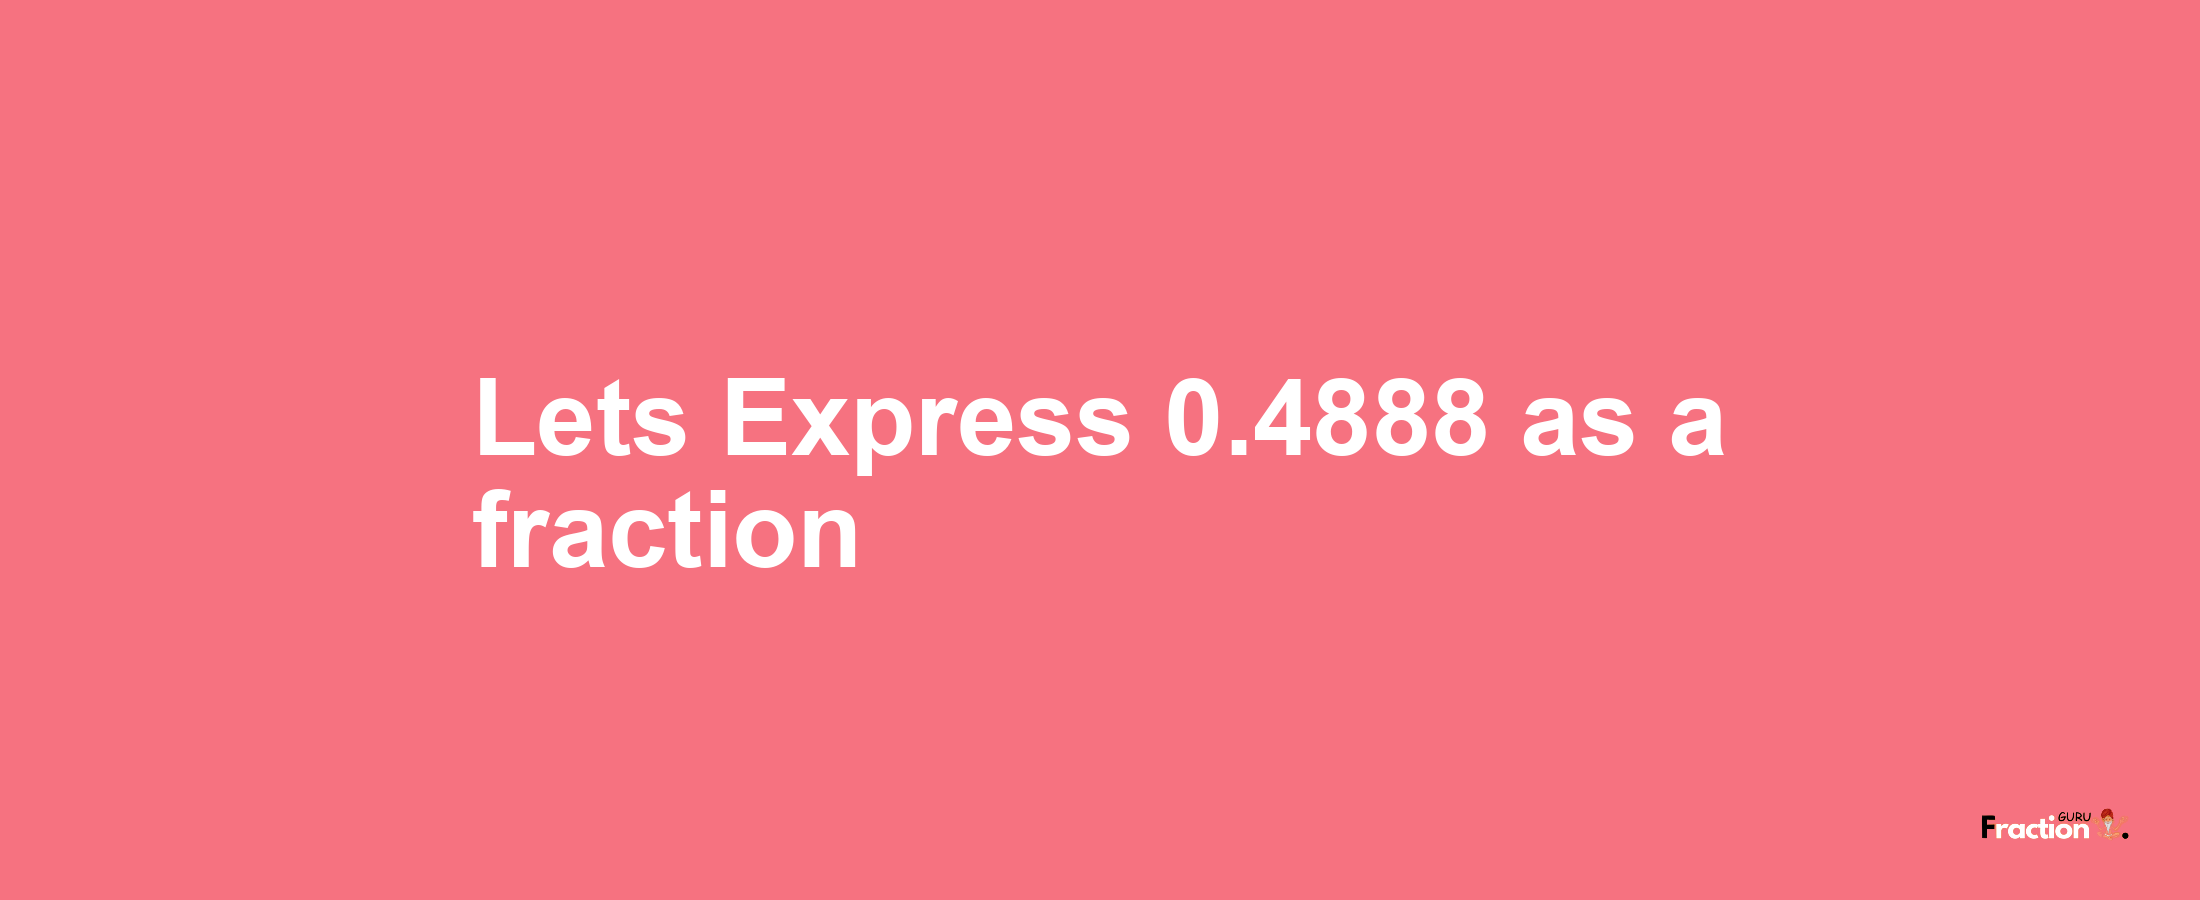 Lets Express 0.4888 as afraction